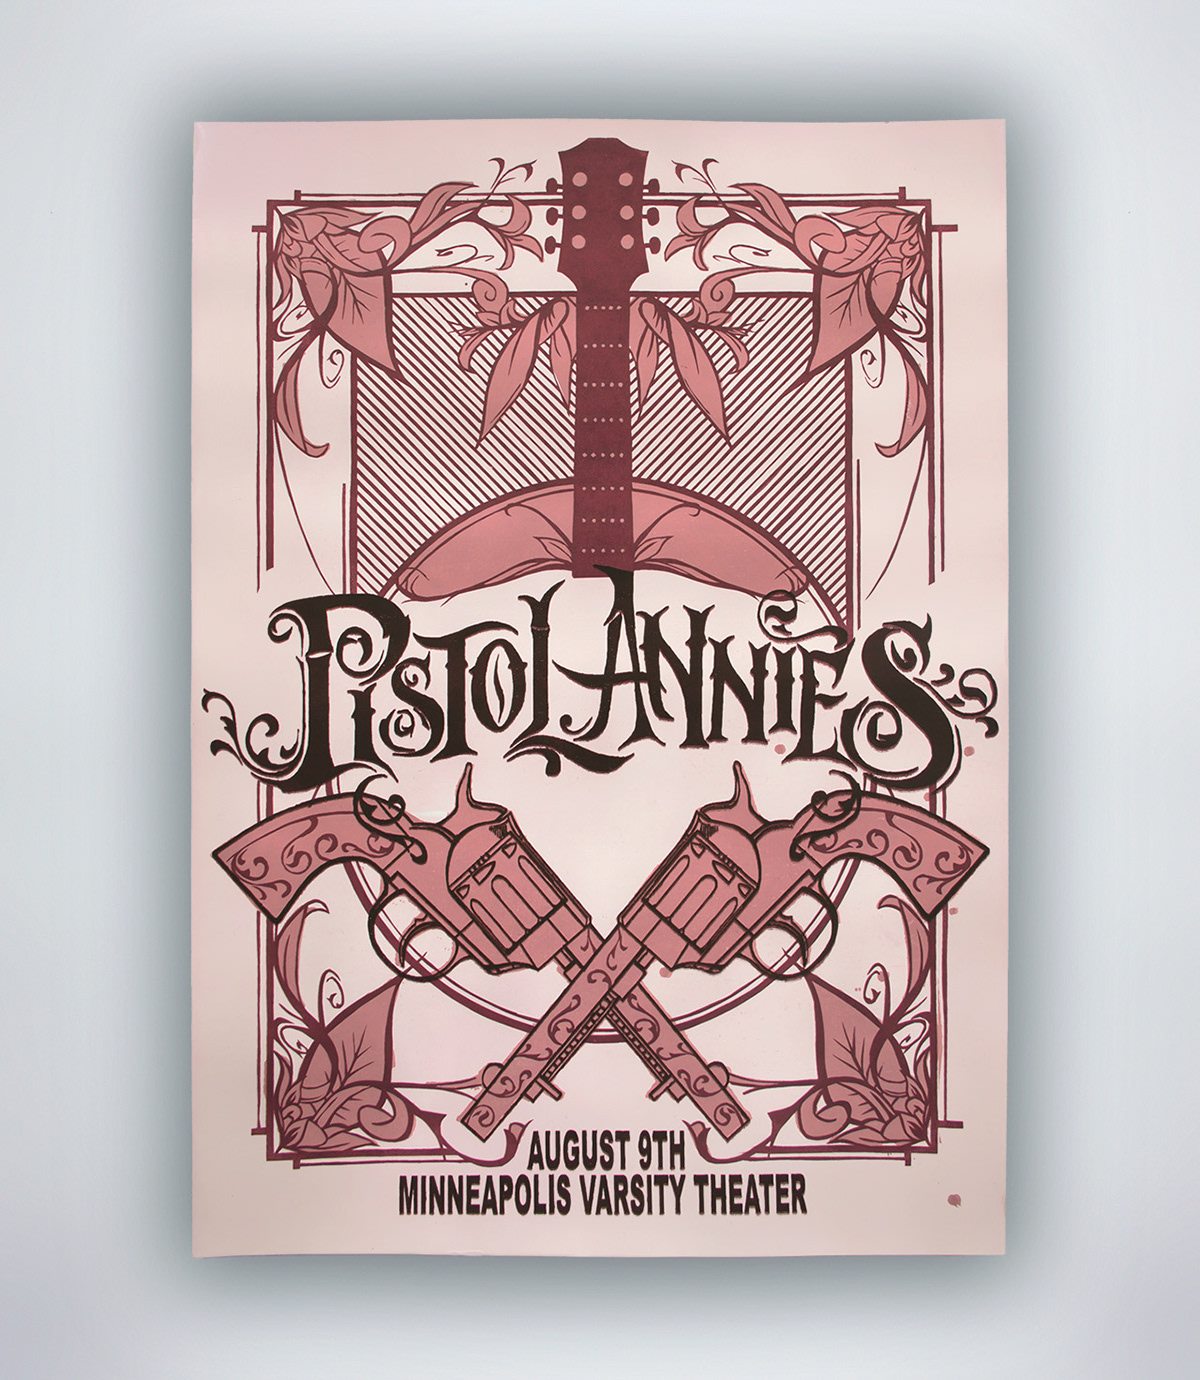 pistol annies annie's band country girl pink peach Revolver graphics design art poster print screenprint